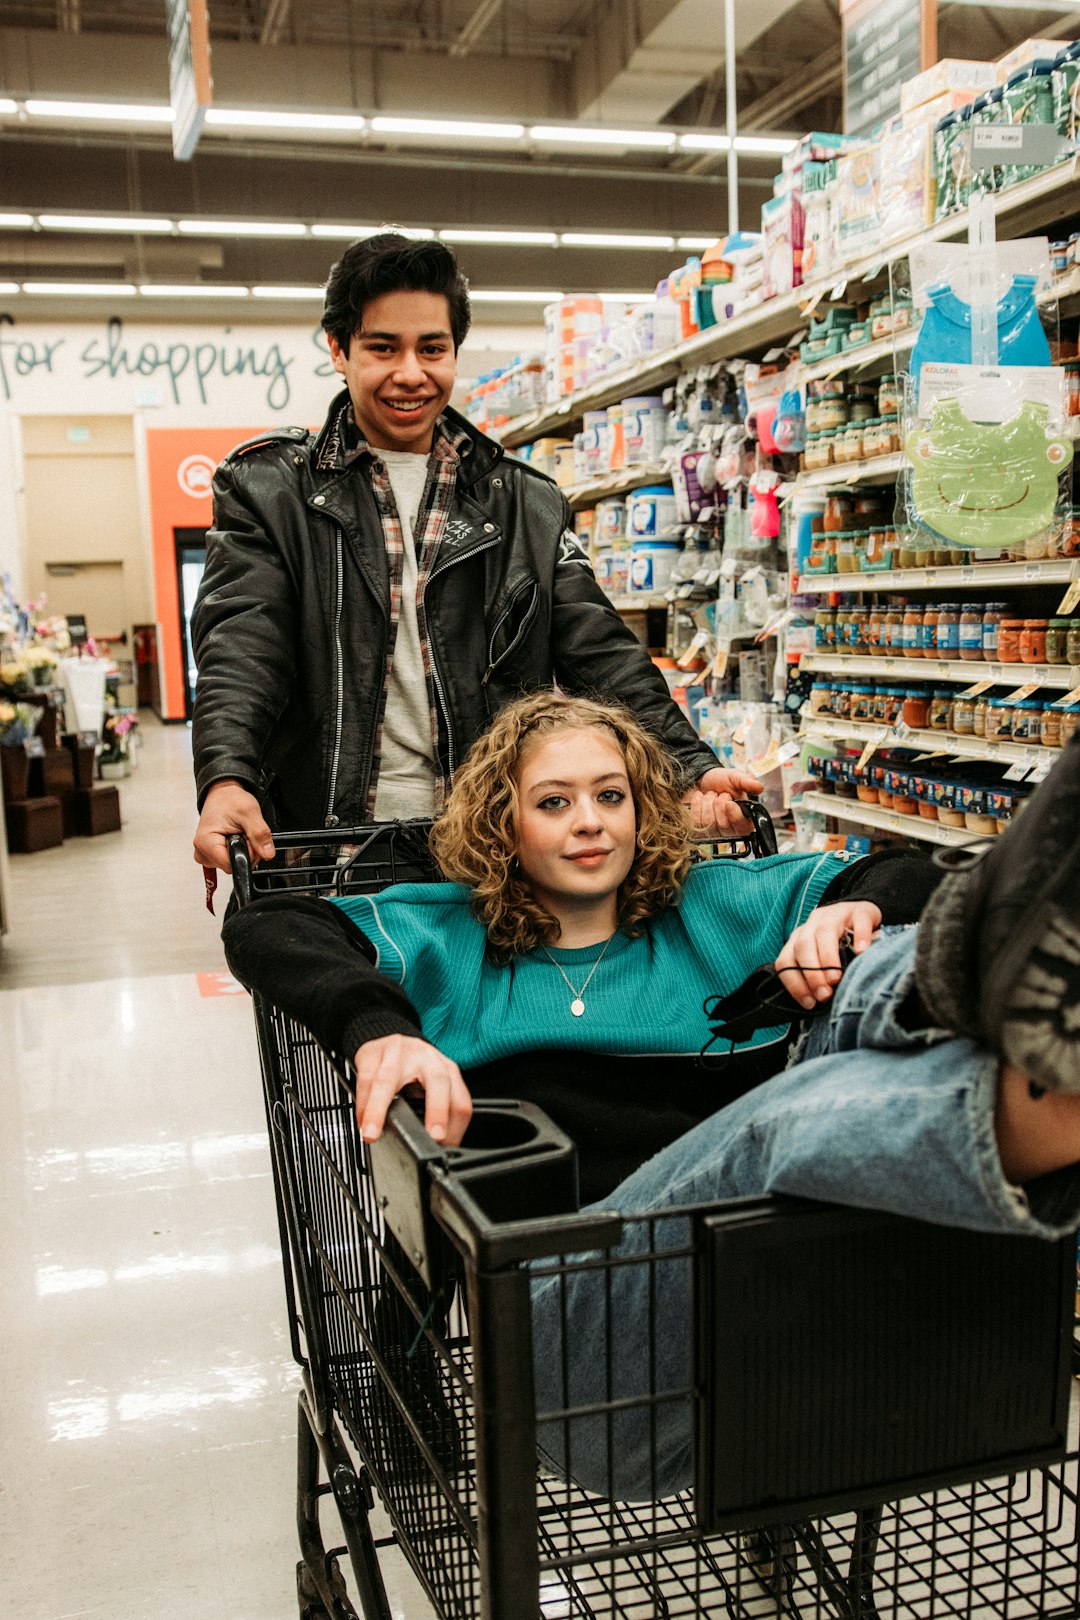 woman in black leather jacket sitting on shopping cart